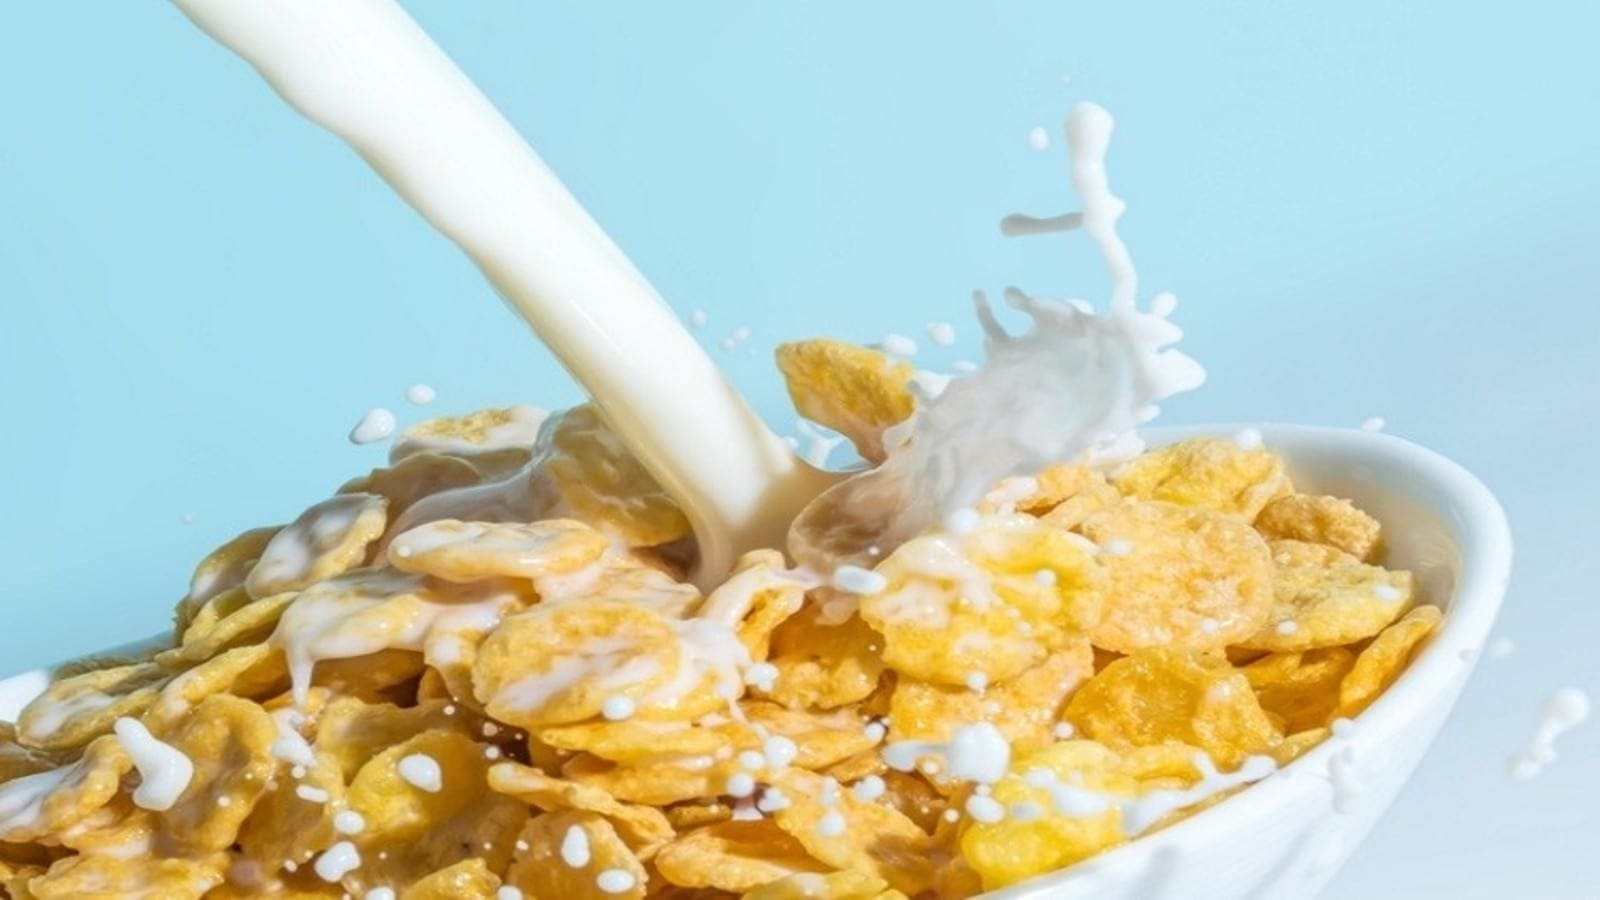 Tree house sells ready-to-eat cereal business to Post Holdings for US$85m